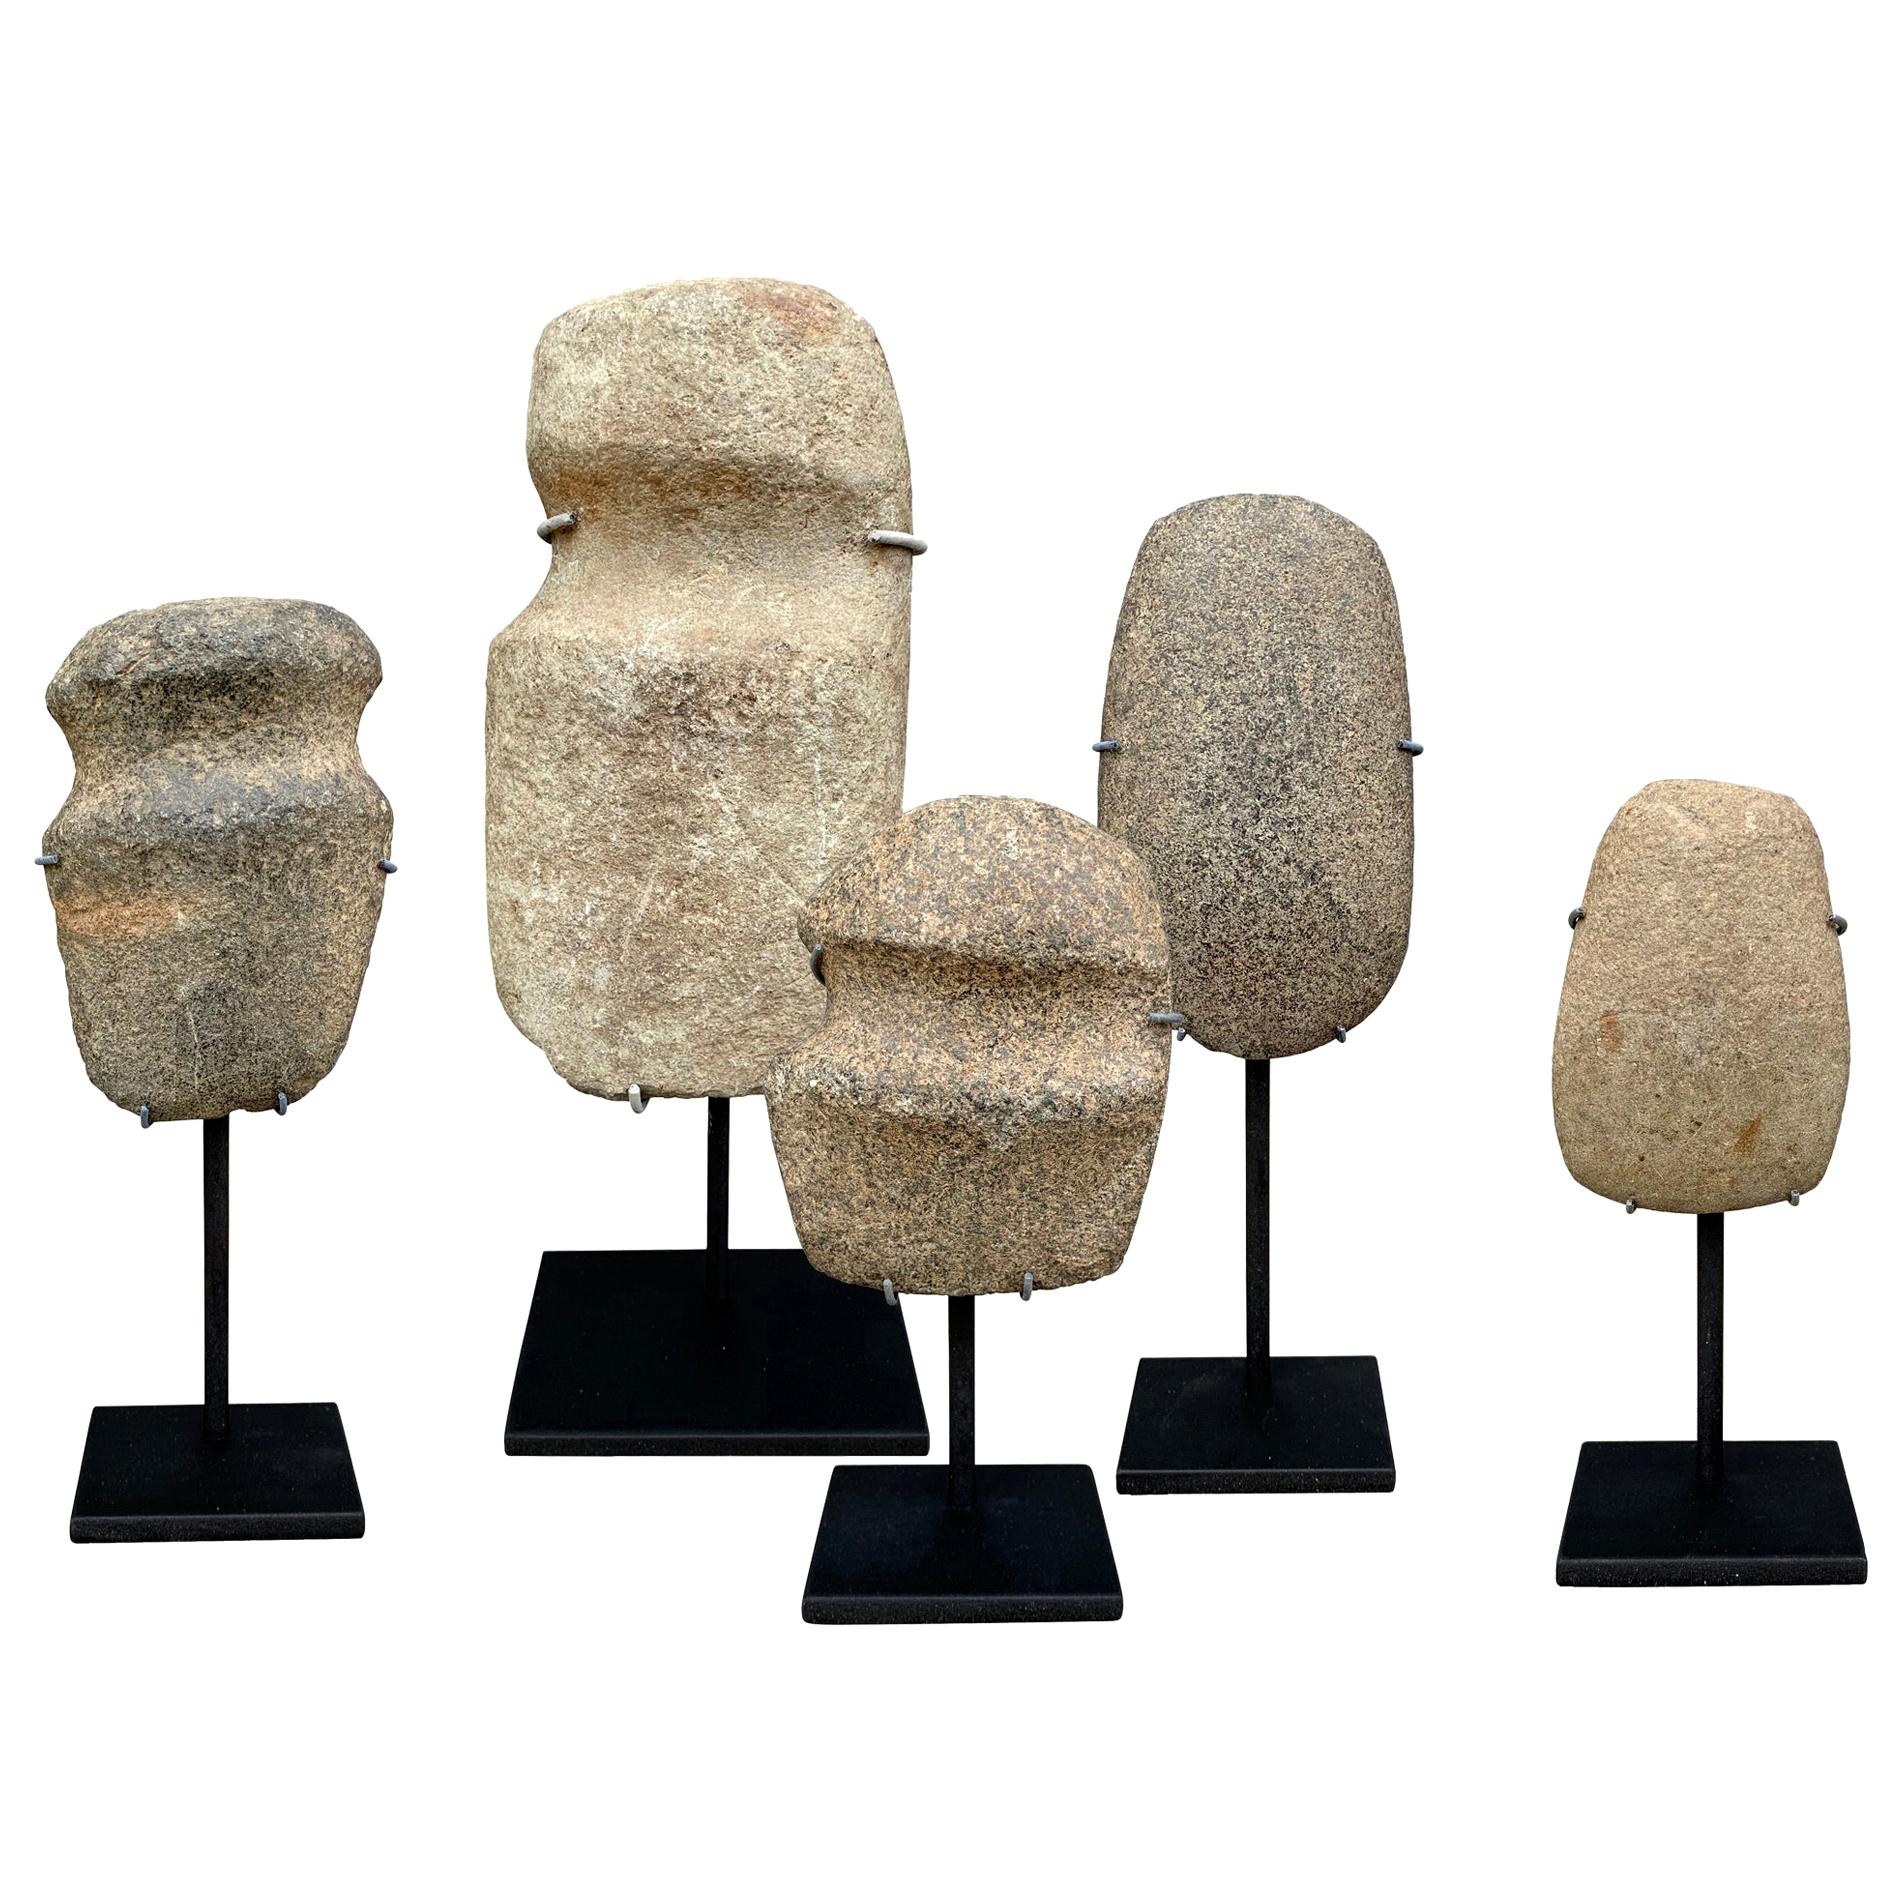 Collection of Neolithic Stone Axe Heads on Stands